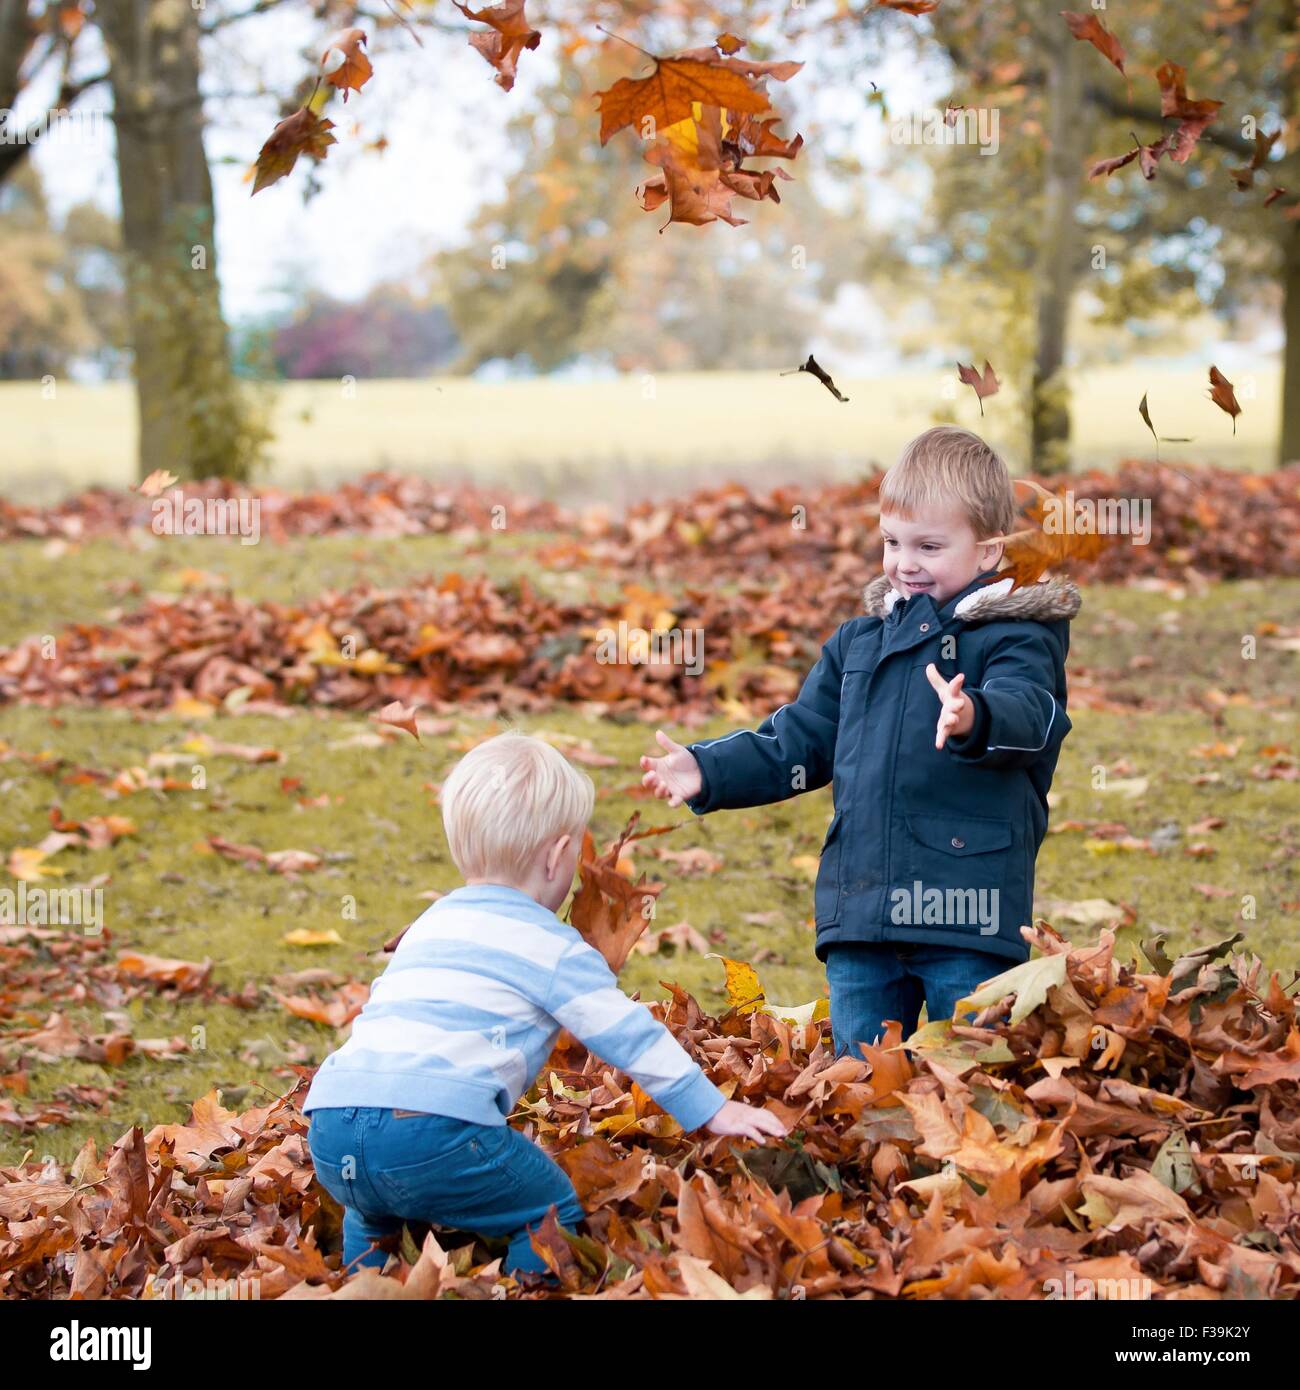 Two boys playing with autumn leaves Stock Photo